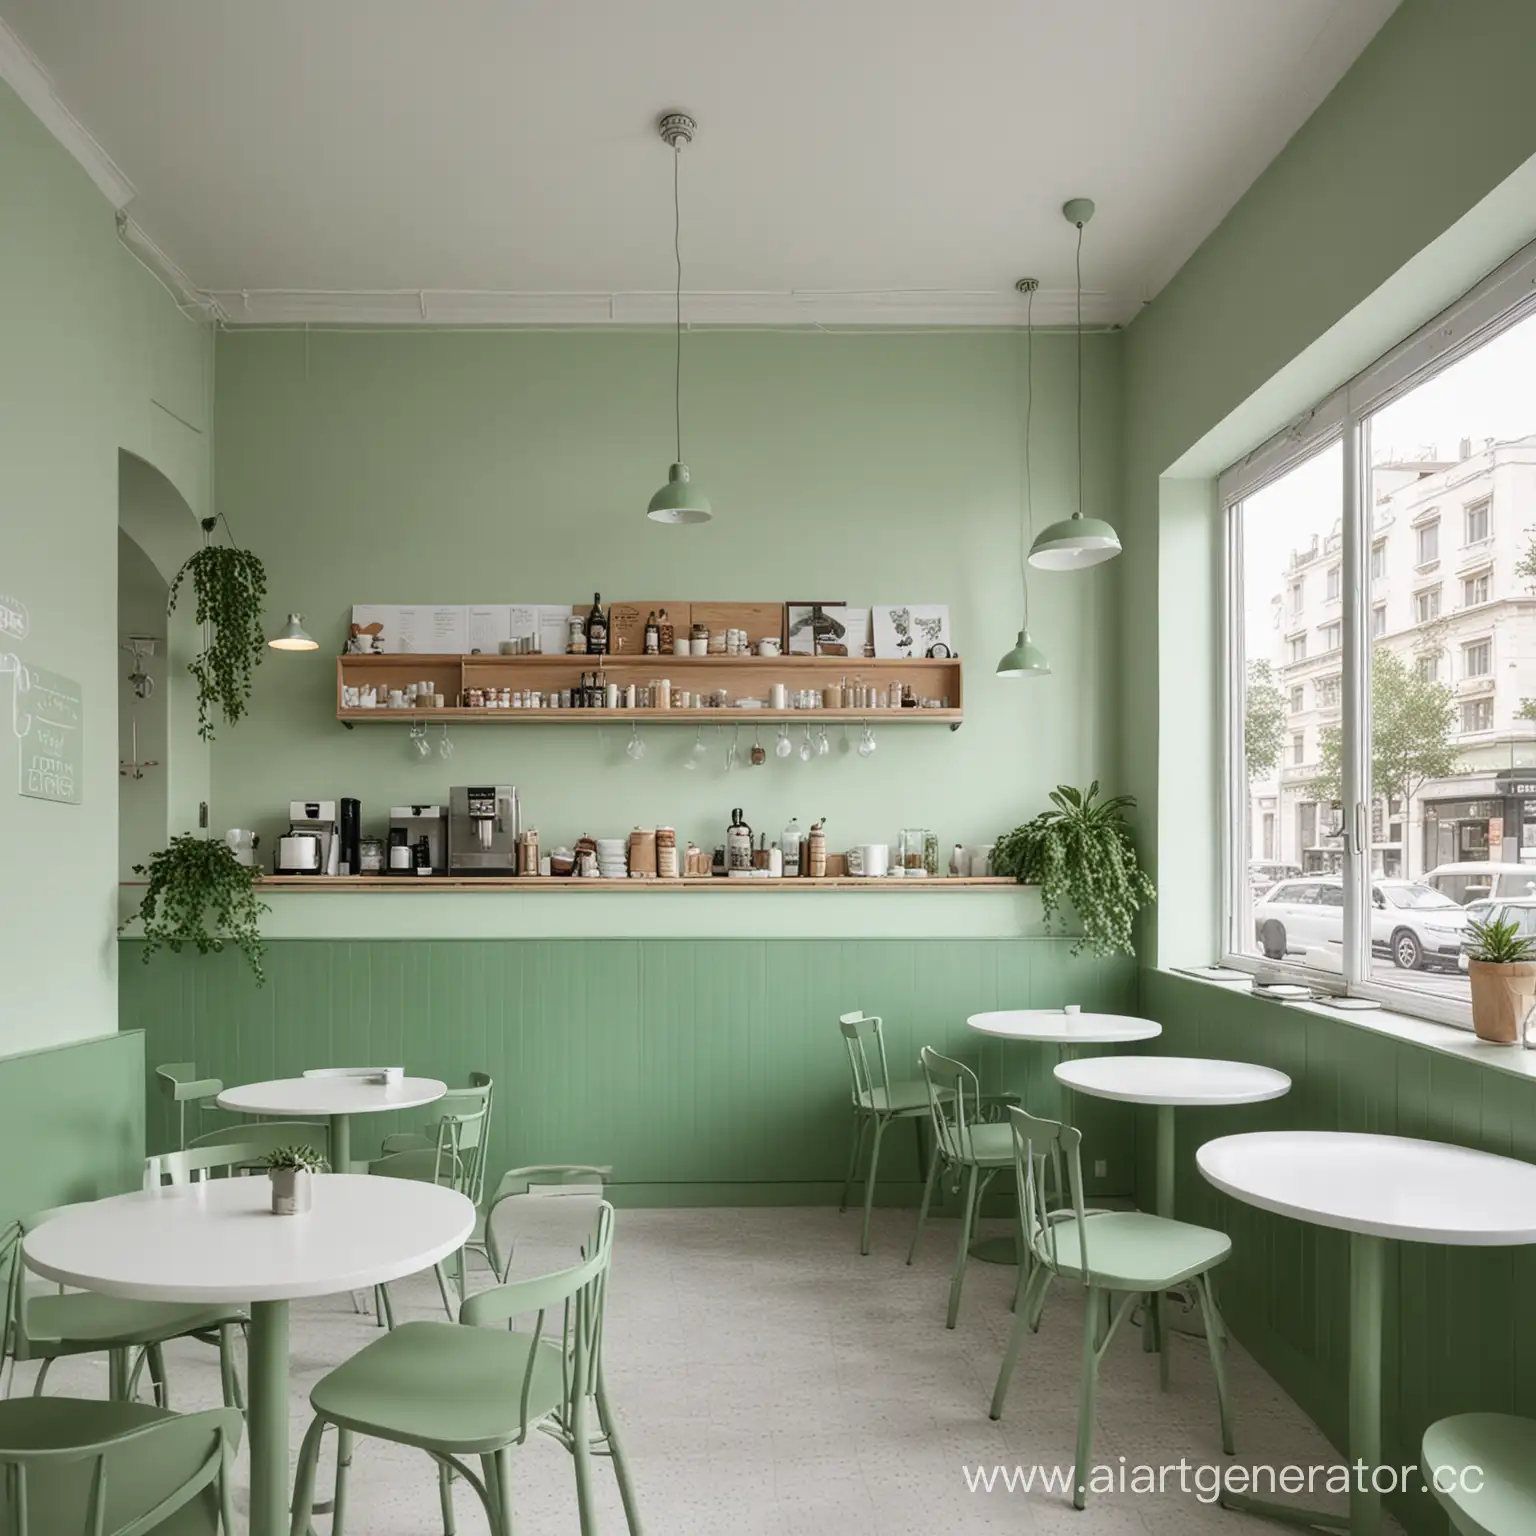 Modern-Cafe-Interior-with-Green-Accents-Captivating-Design-for-Promotional-Photography